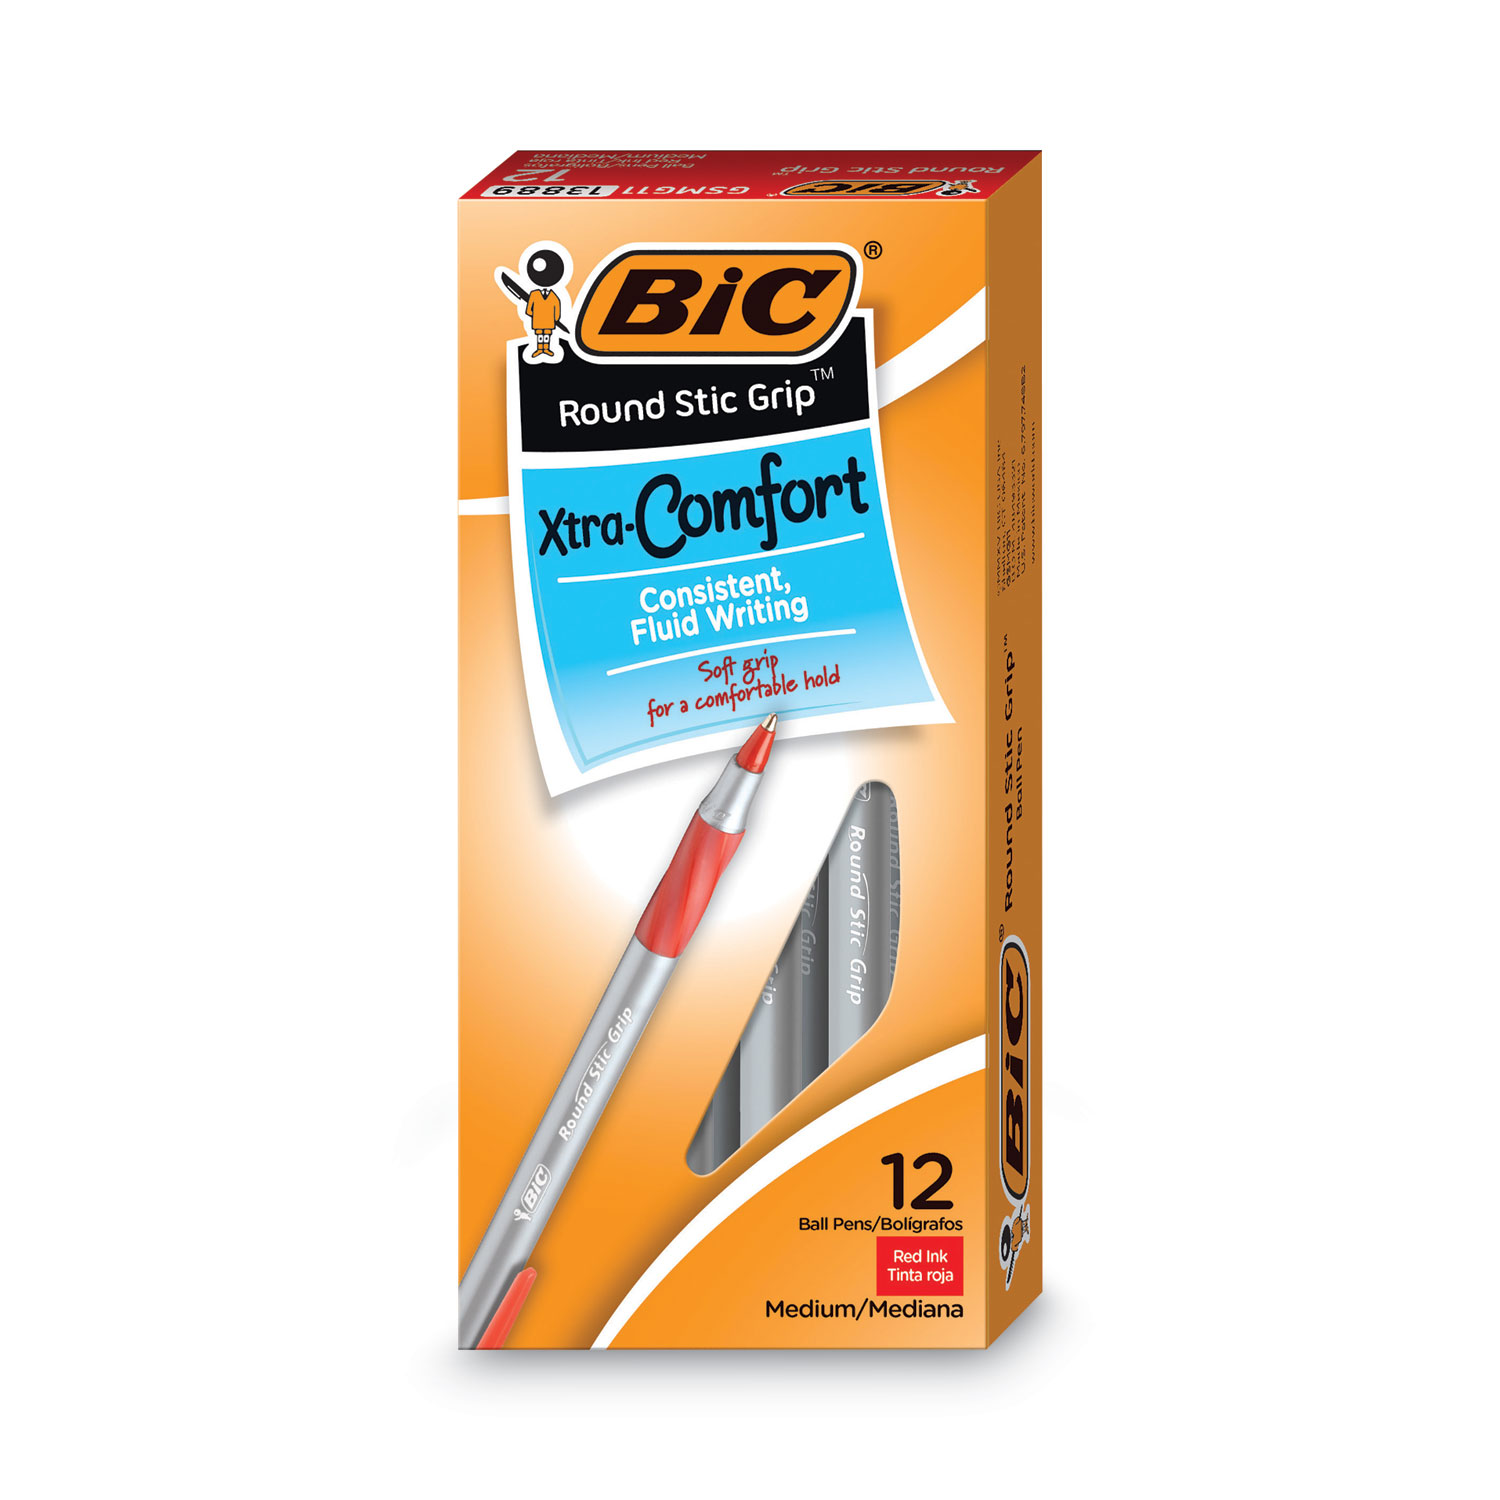 Round Stic Grip Xtra Comfort Ballpoint Pen, Easy-Glide, Stick, Medium 1.2  mm, Red Ink, Gray/Red Barrel, Dozen - Office Express Office Products